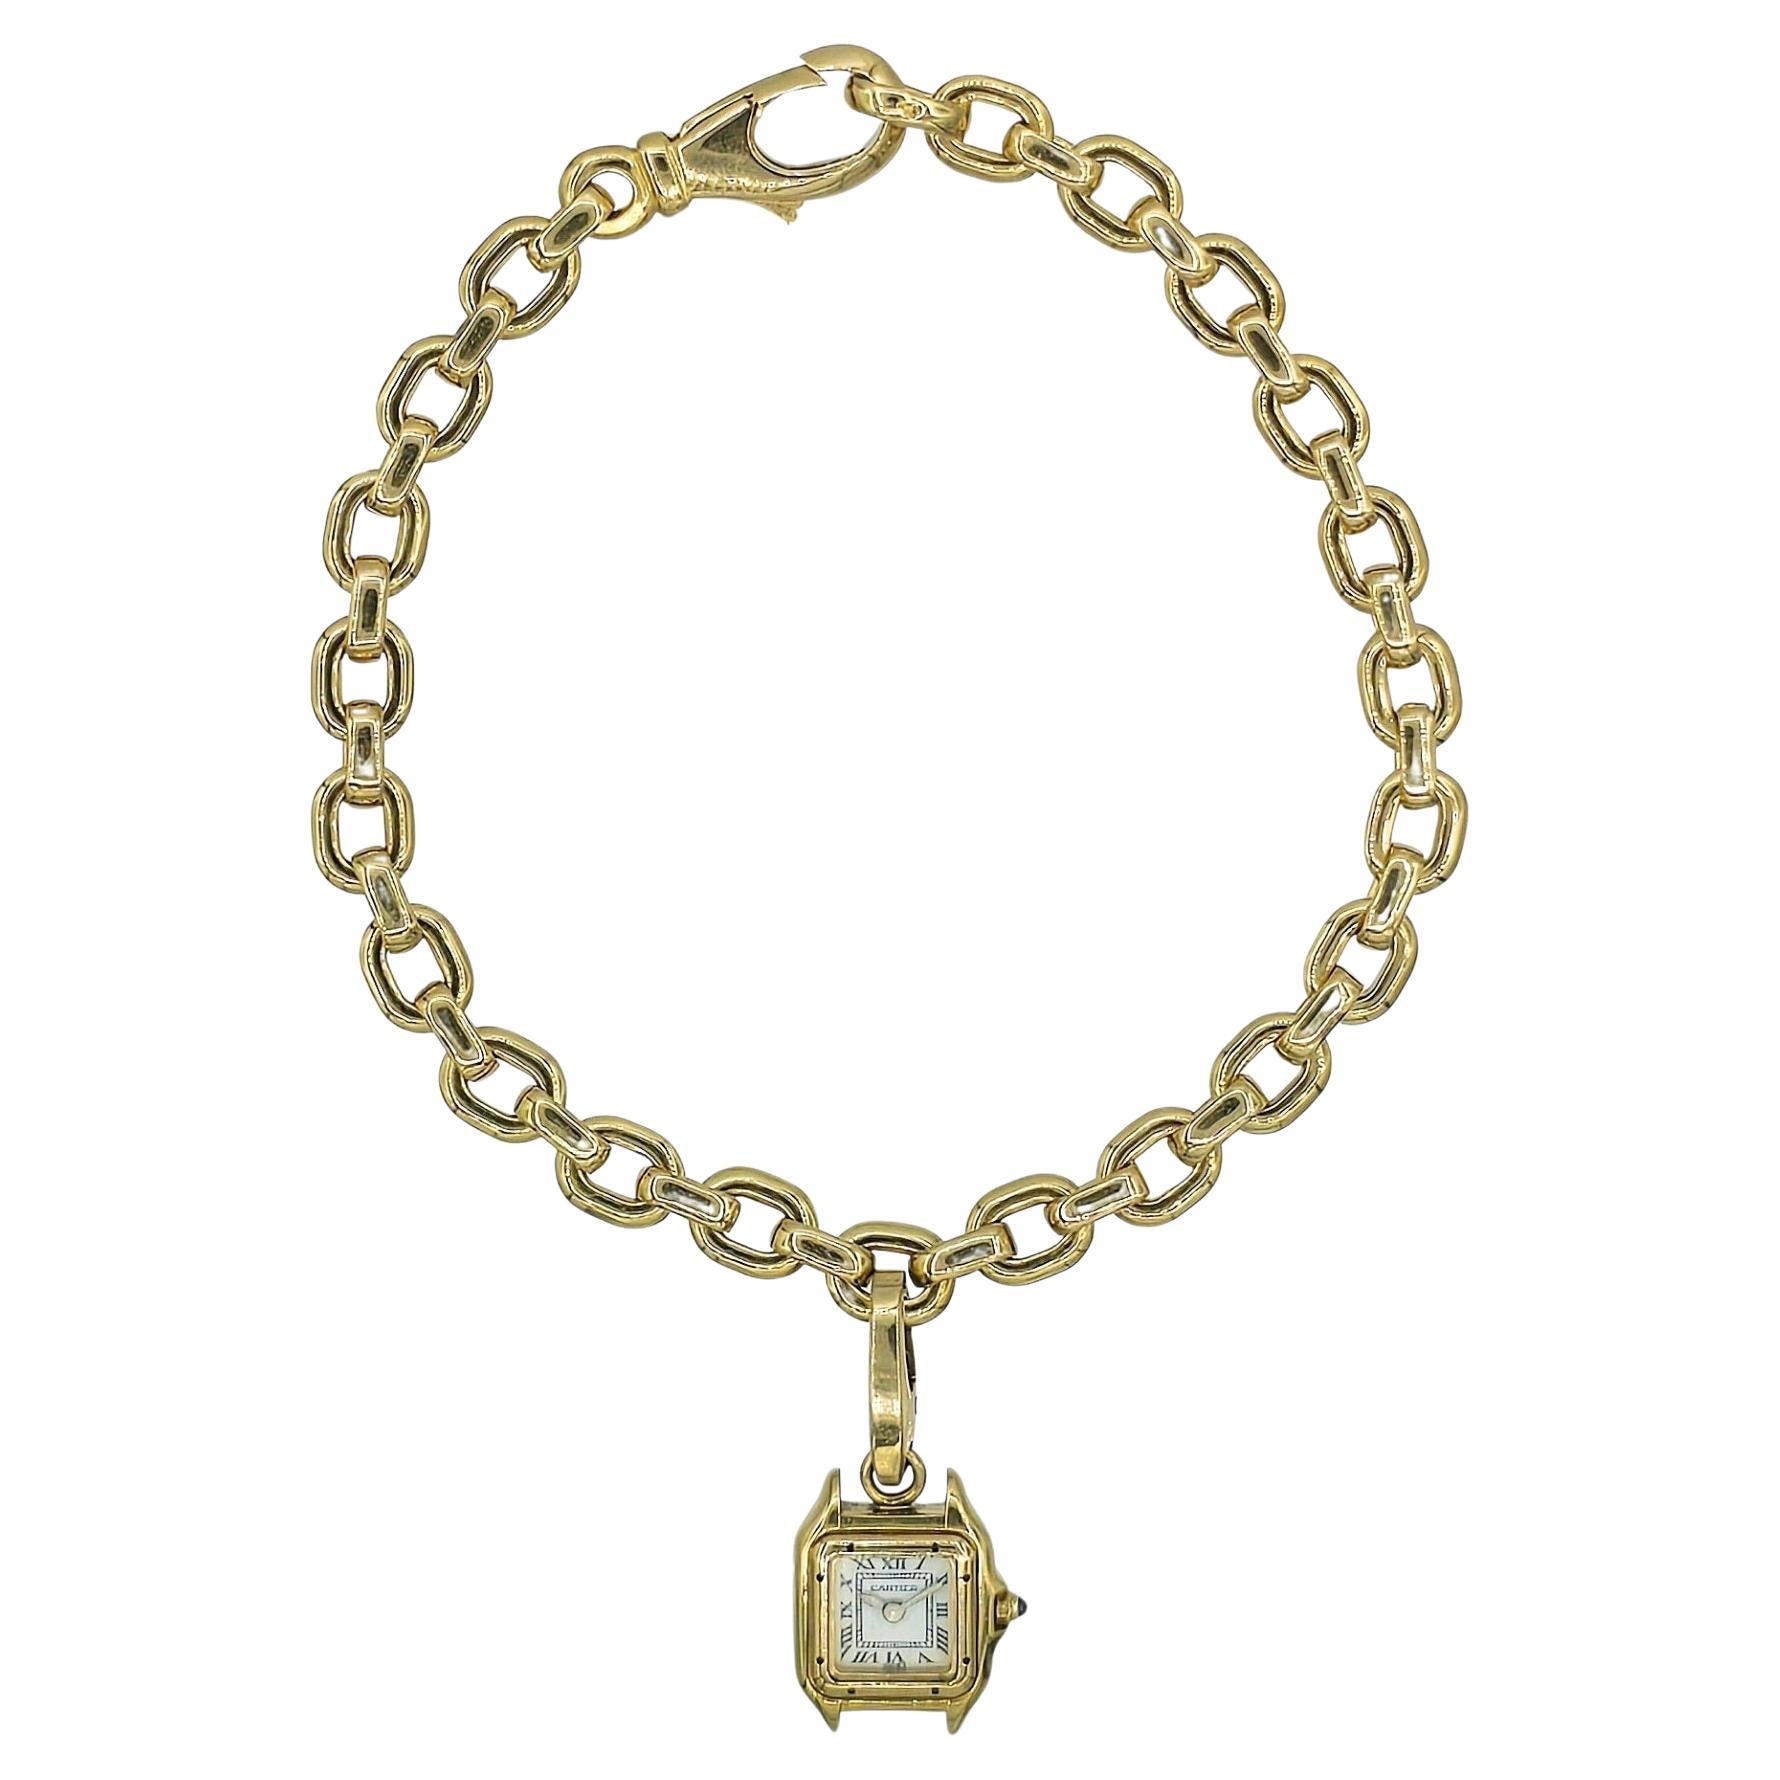 Vintage Cartier 18k Yellow Gold Bracelet with Panthere Watch Charm